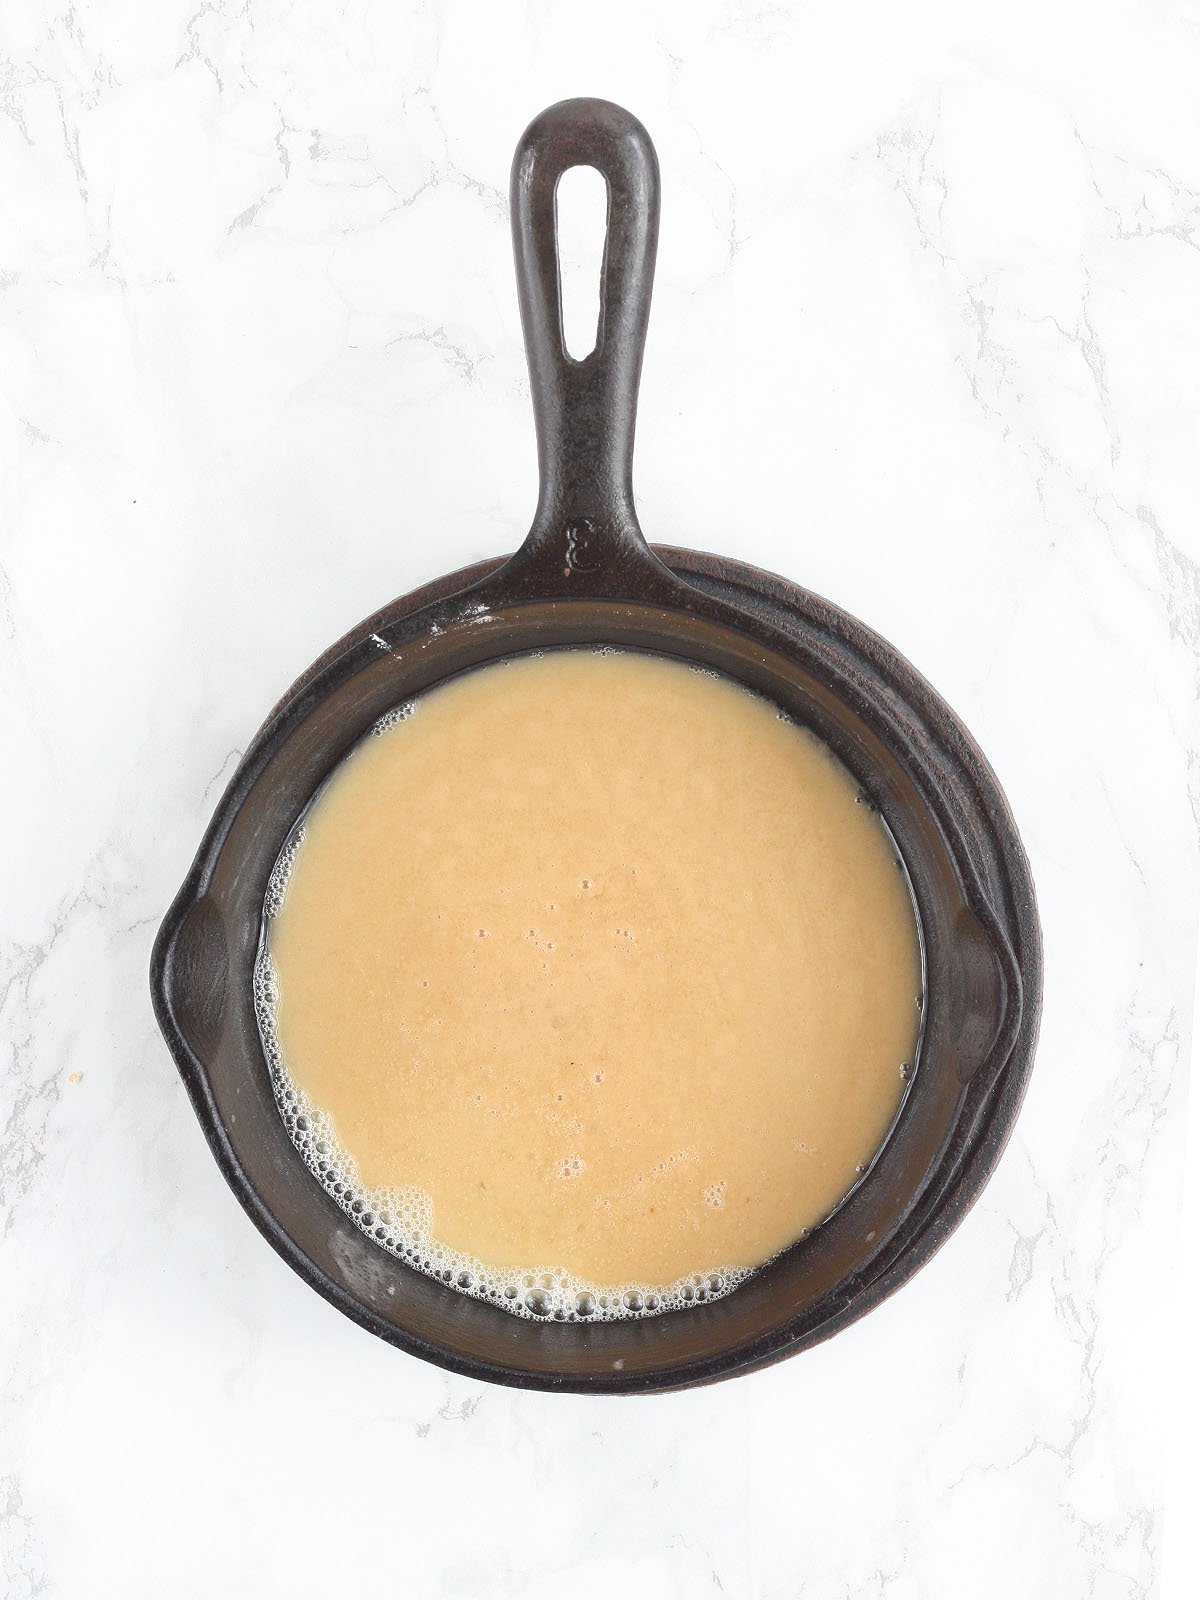 White roux in a cast iron skillet.